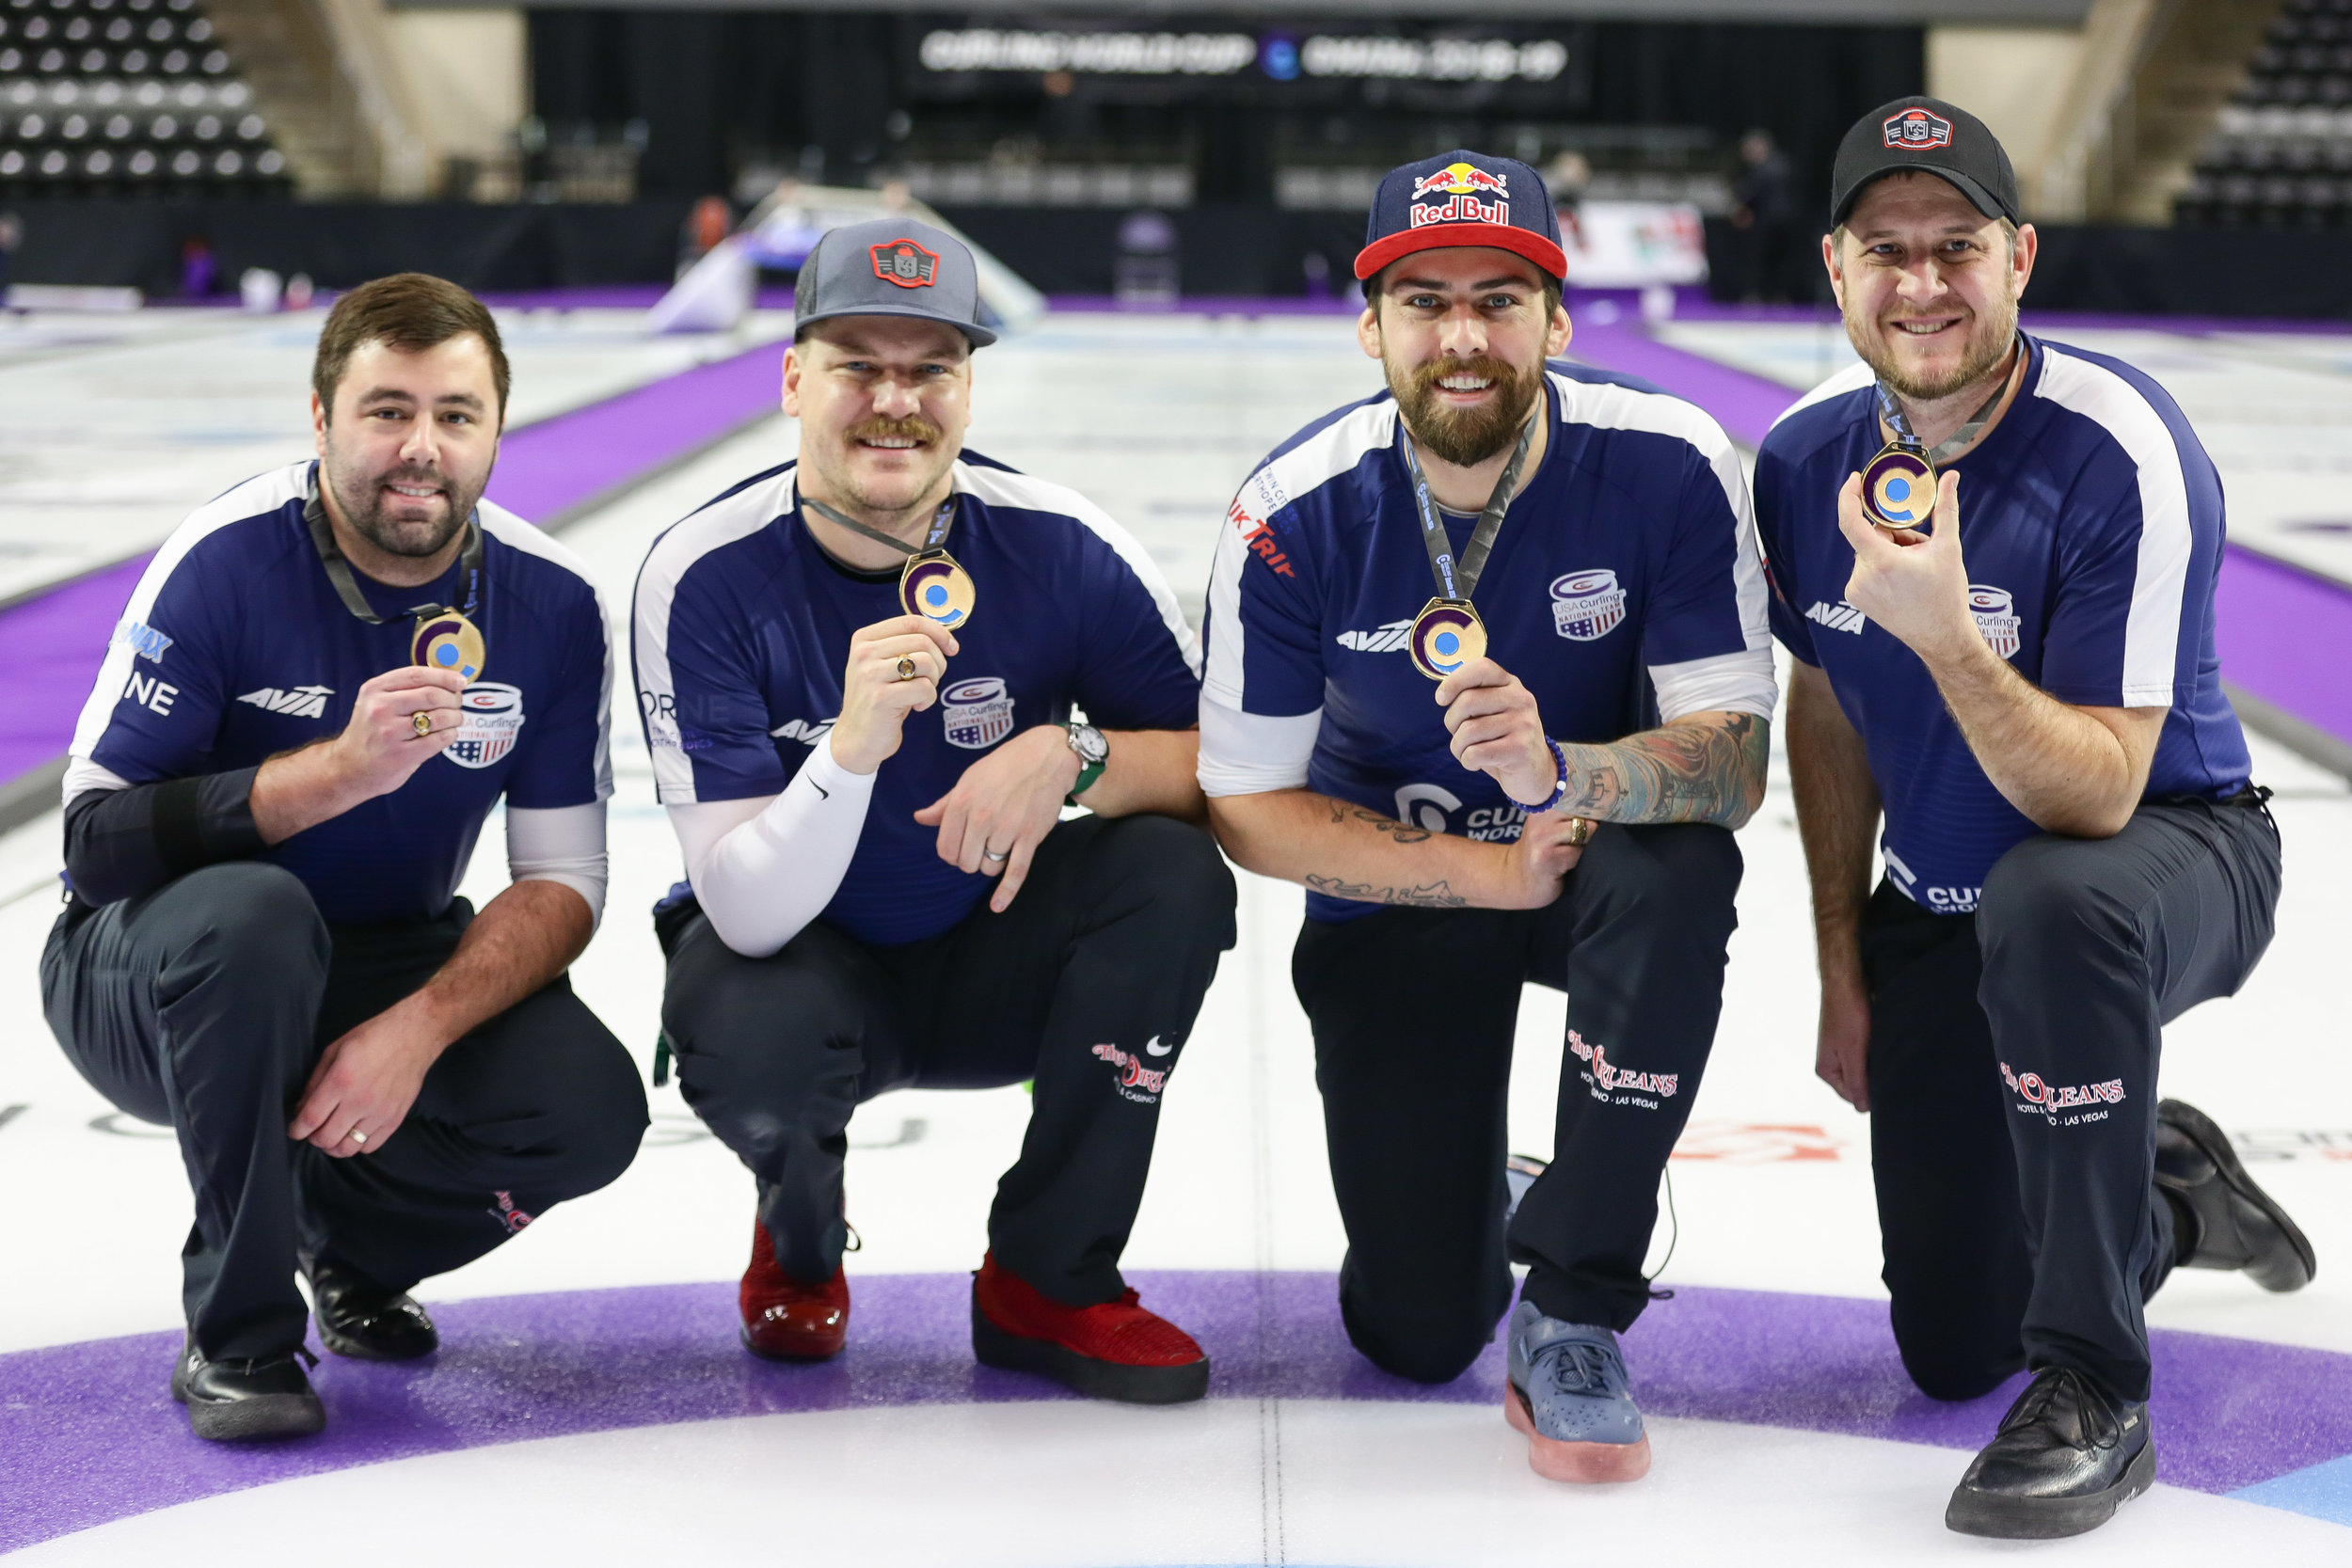 2018 Curling World Cup